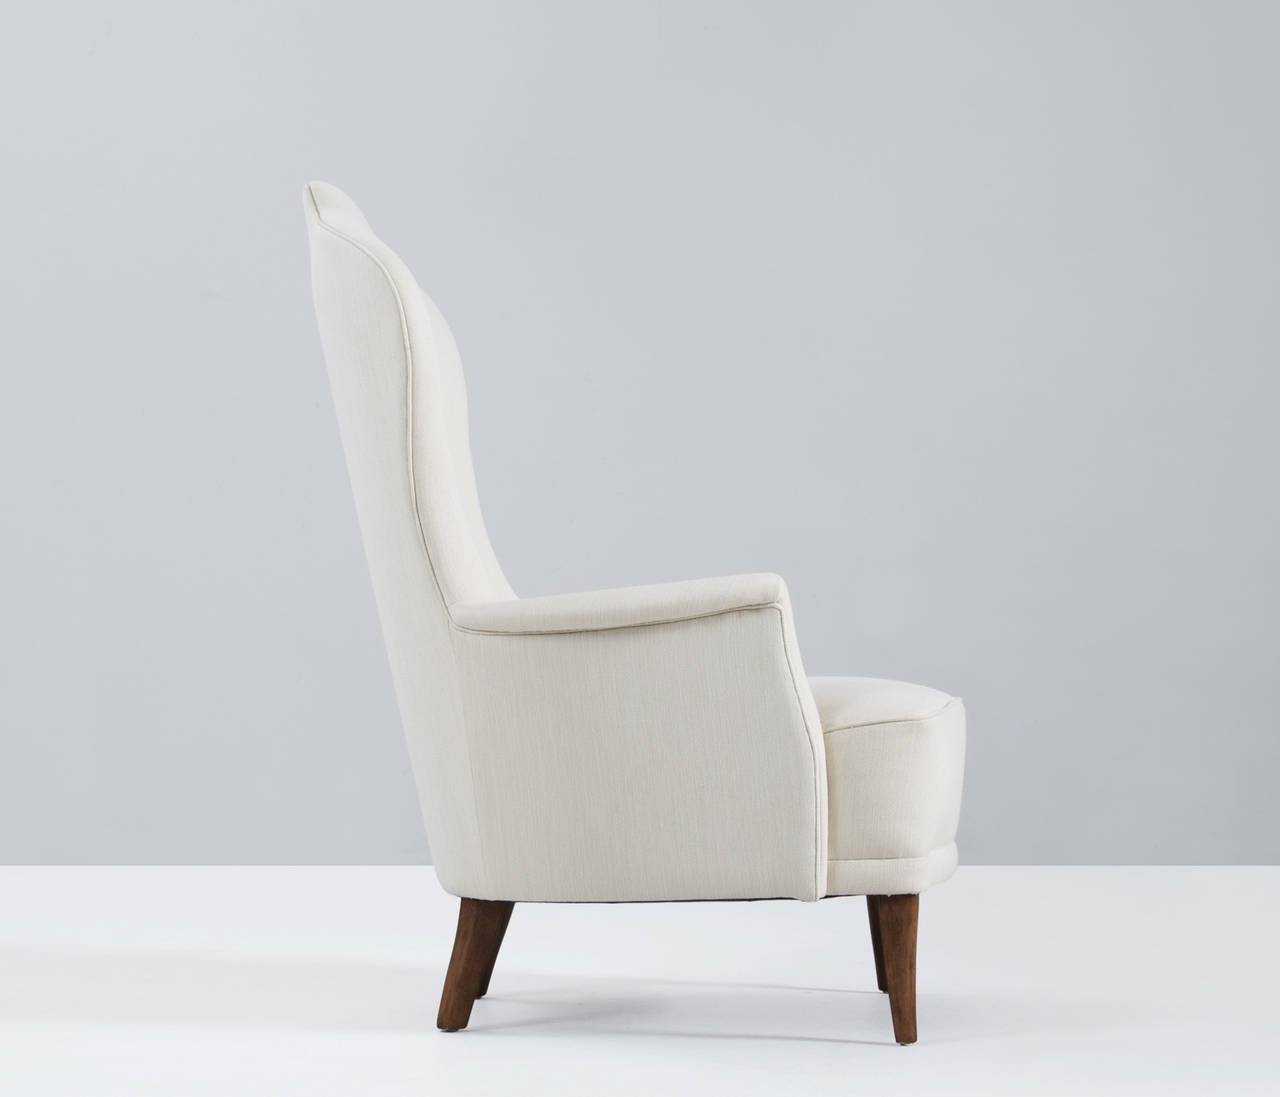 'Farmor' lounge chair, in fabric and wood by Carl Malmsten for O.H Sjögren, Sweden, 1960s. 

The unique lines and curves of the design are striking and the tapered wooden legs complement its shape beautifully, but it's experienced by us to be